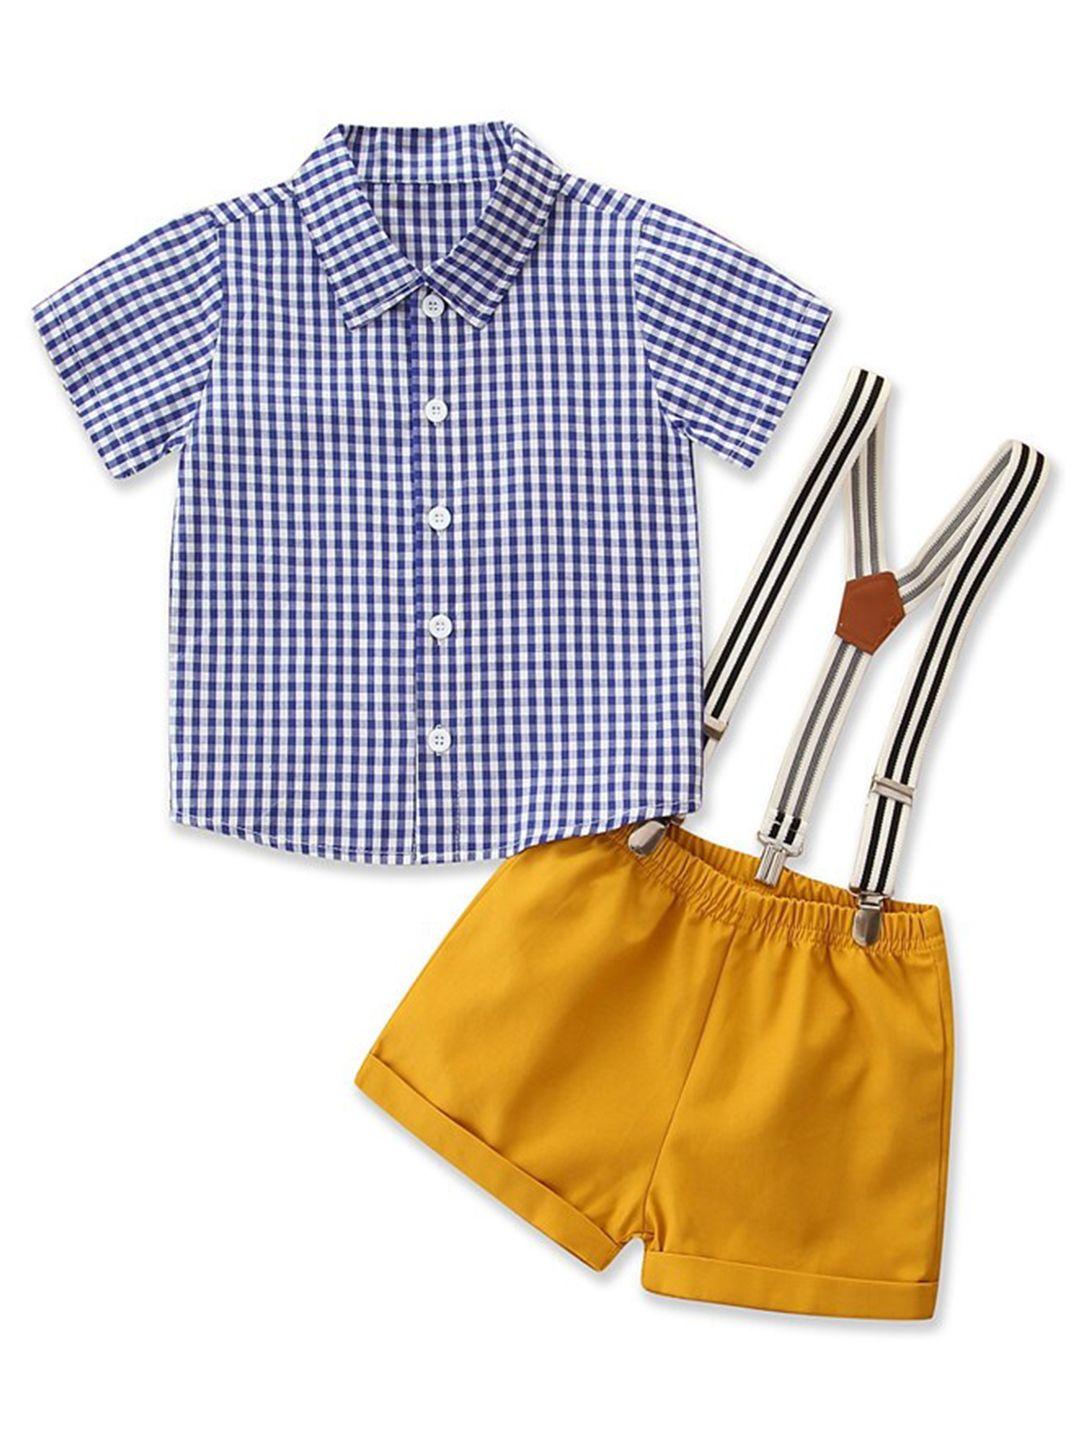 stylecast boys blue checked top with shorts